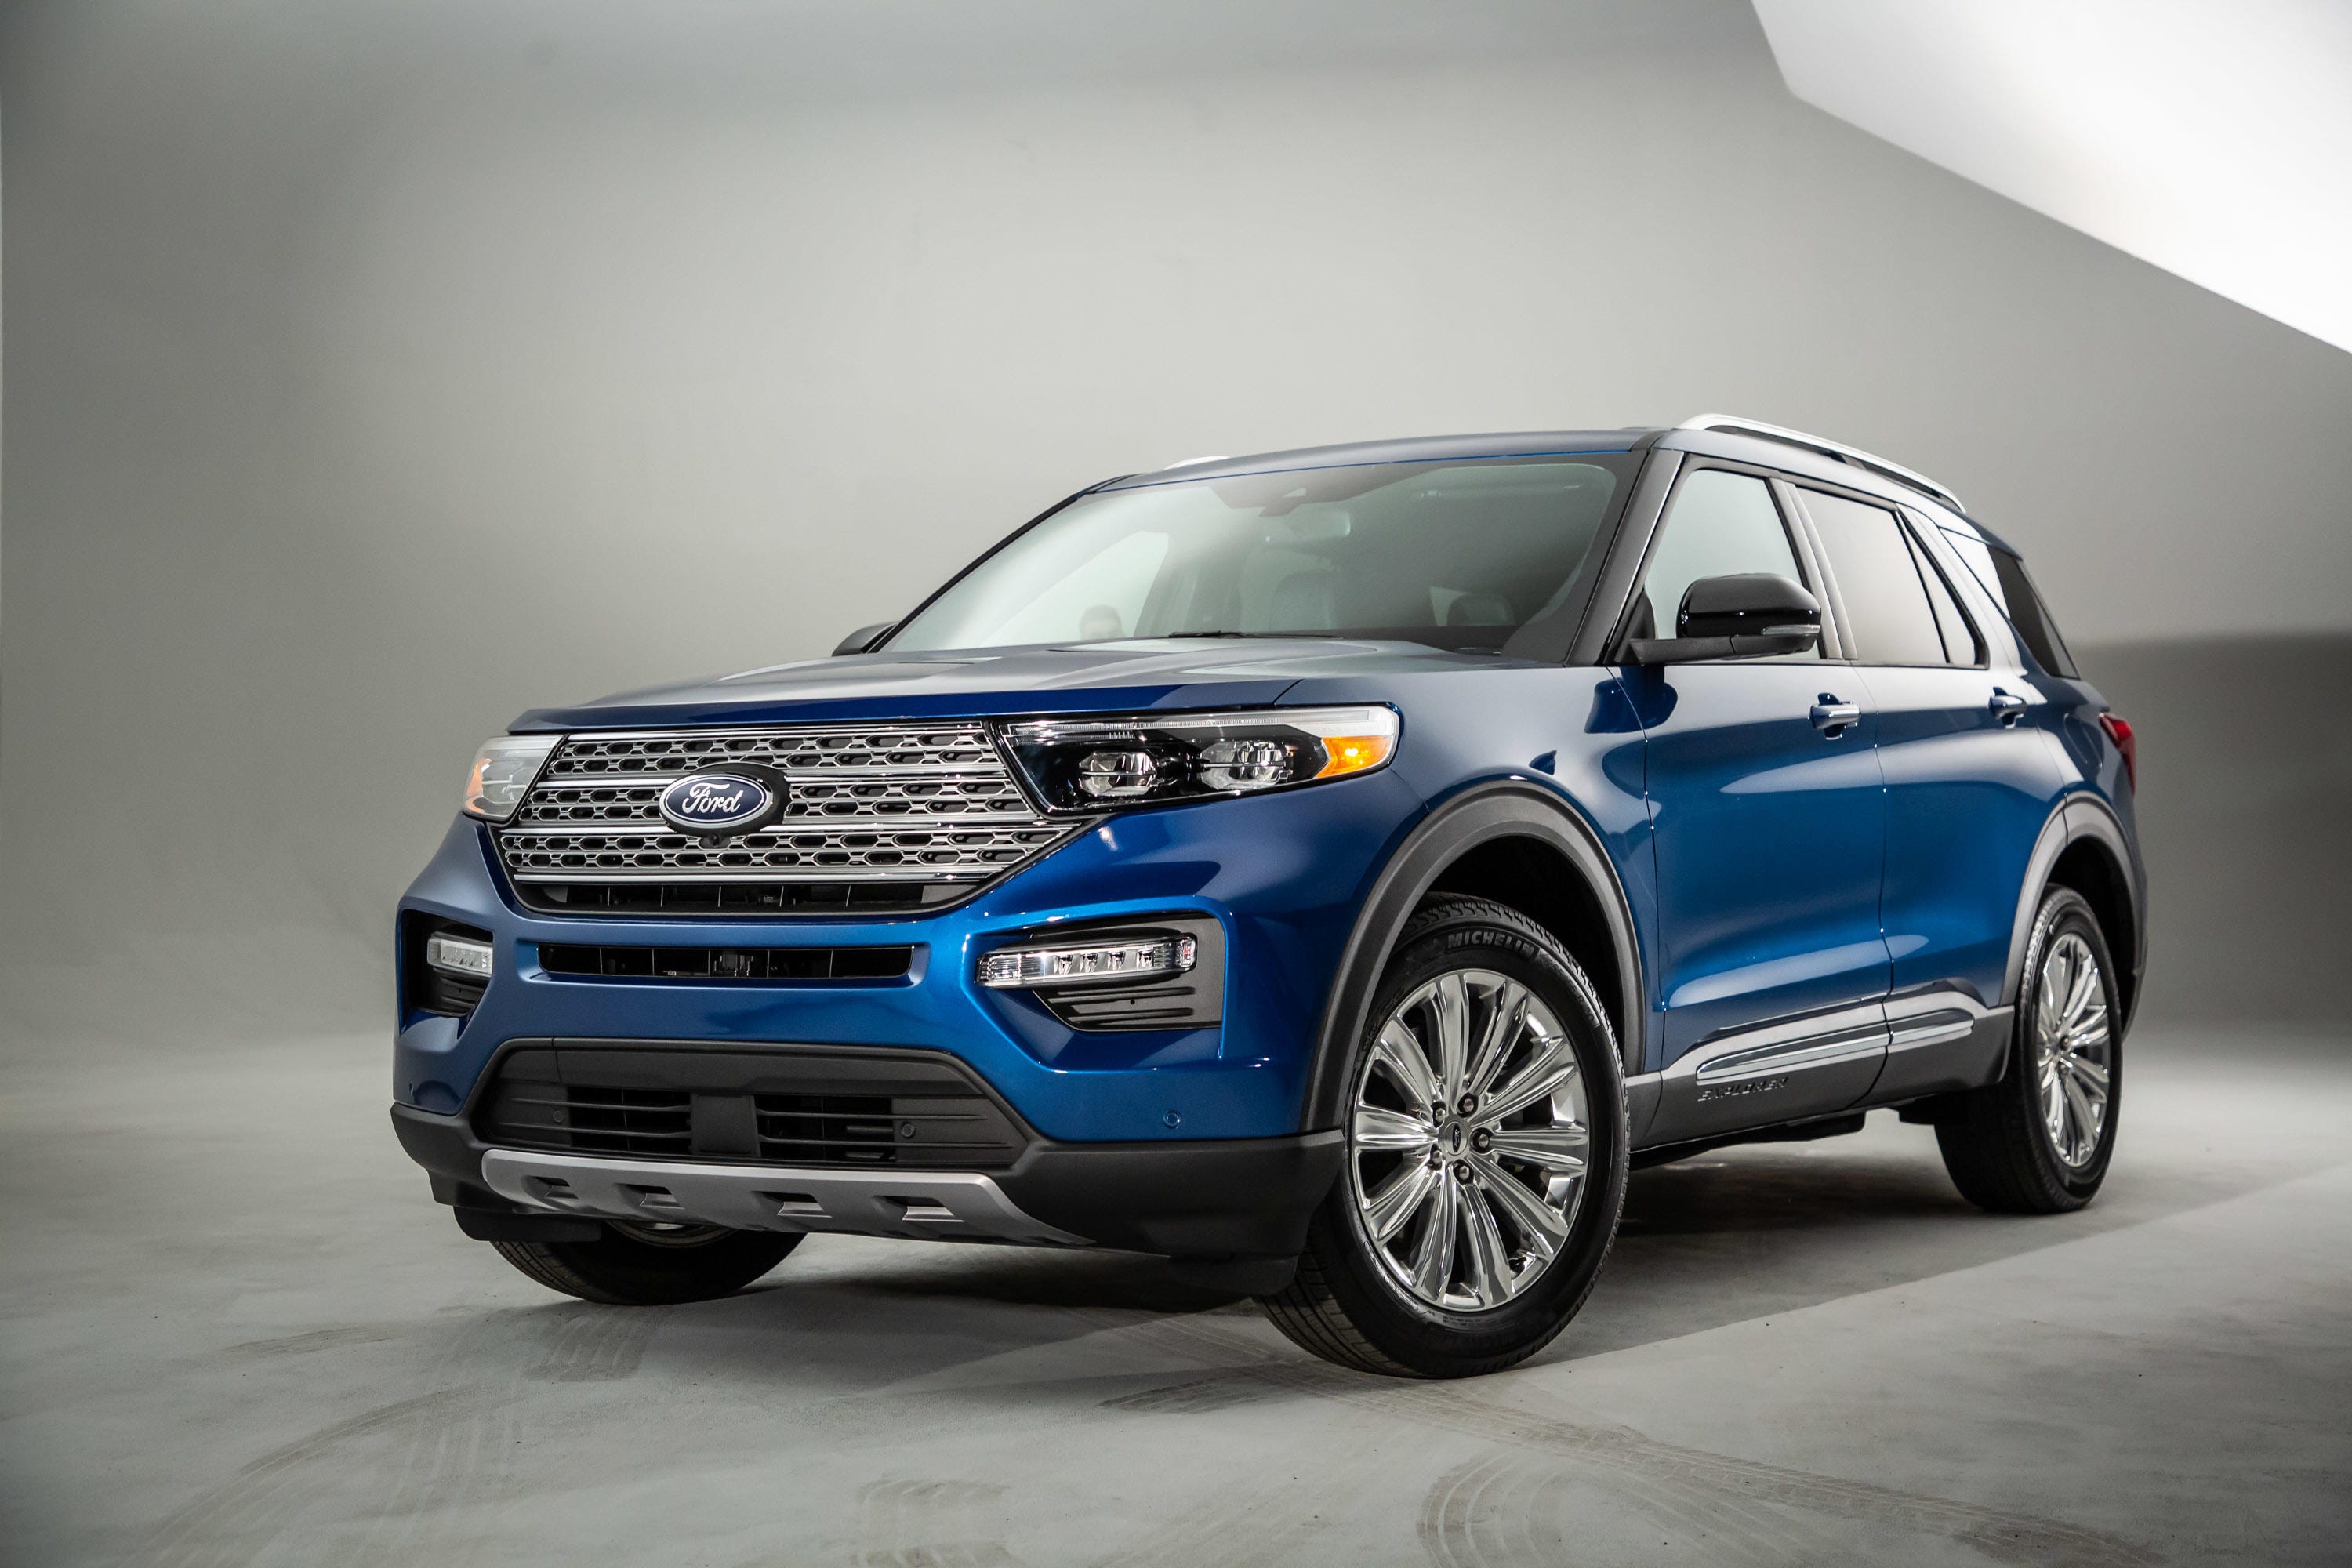 2020 Ford Explorer Hybrid is a green, family-carrying machine